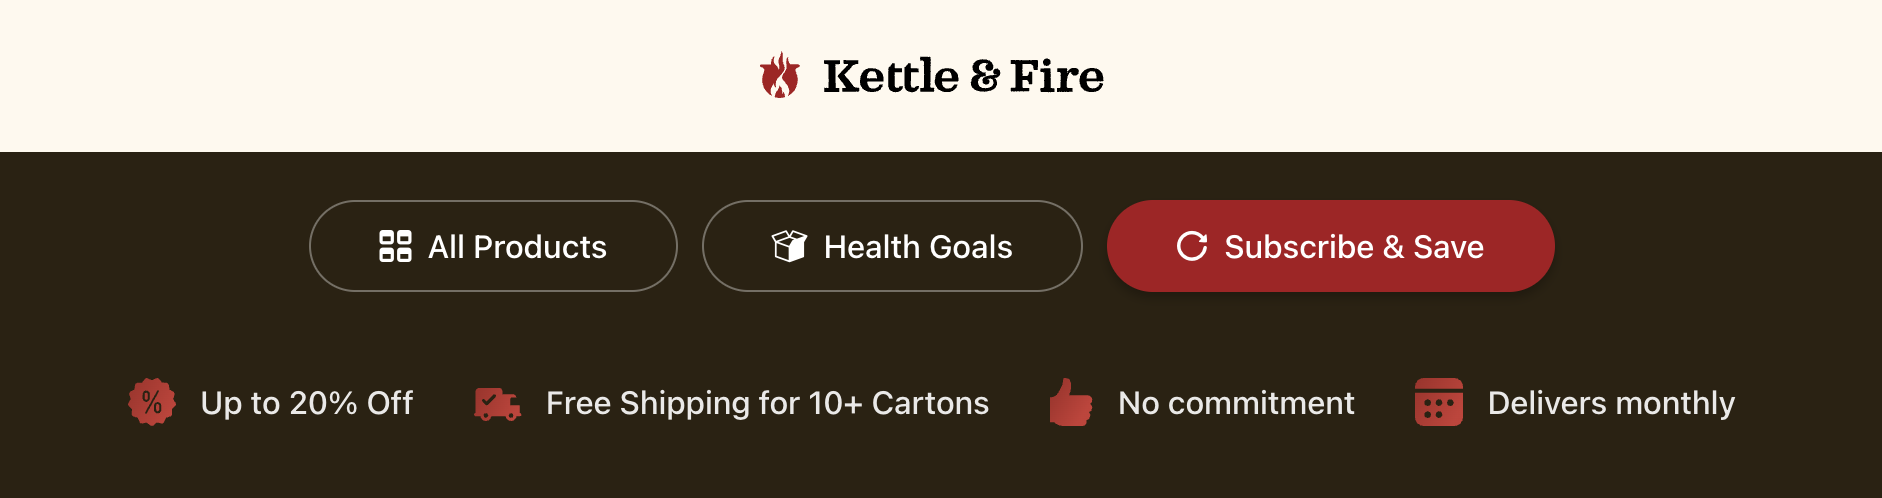 This screenshot shows Kettle & Fire's subscription offerings.